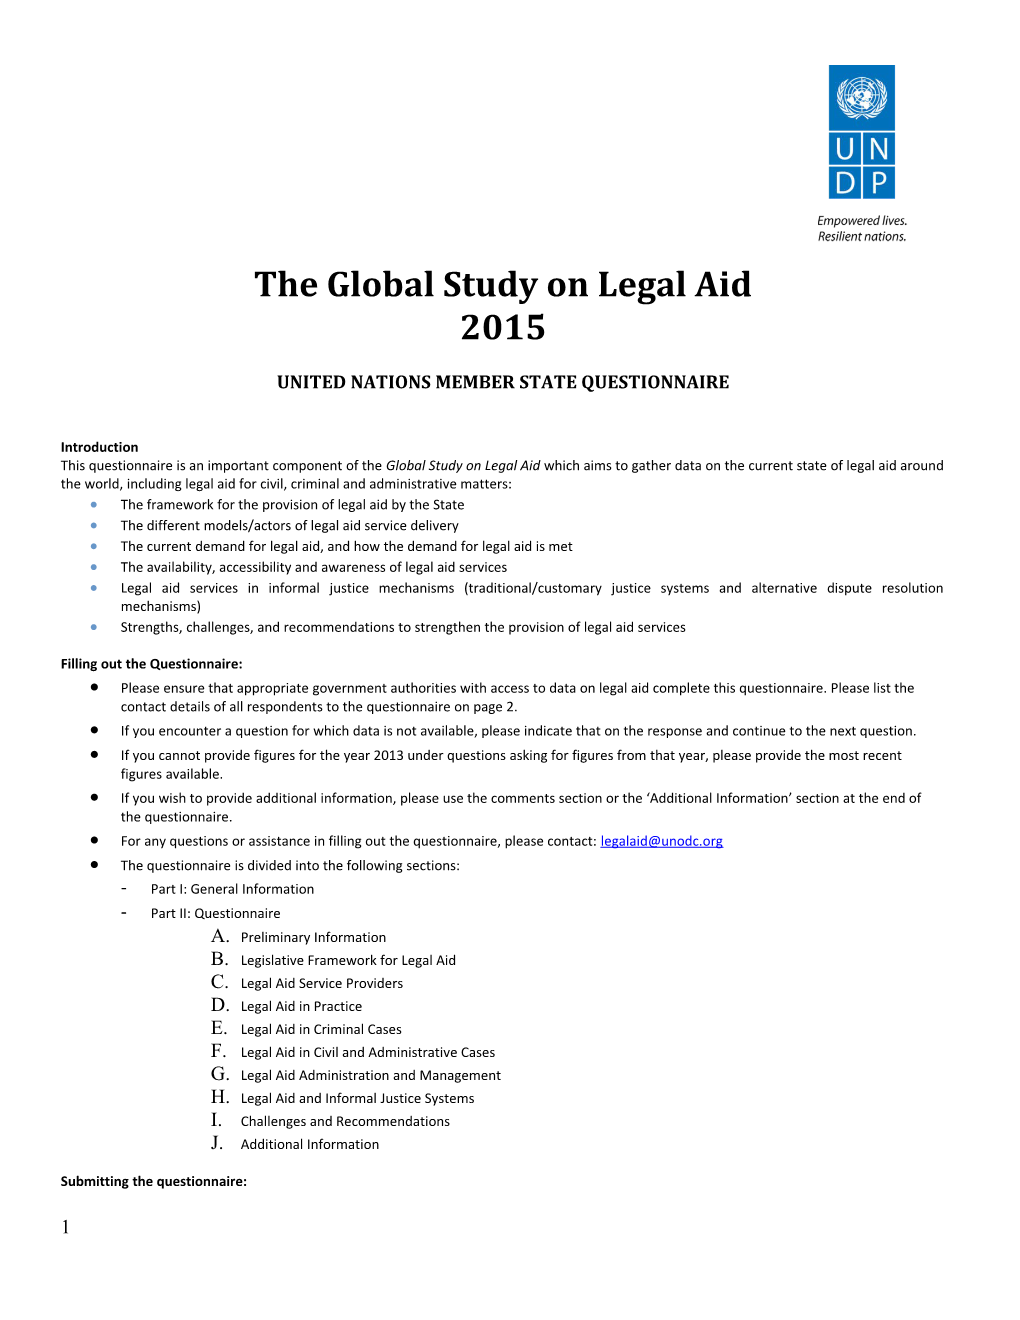 The Global Study on Legal Aid